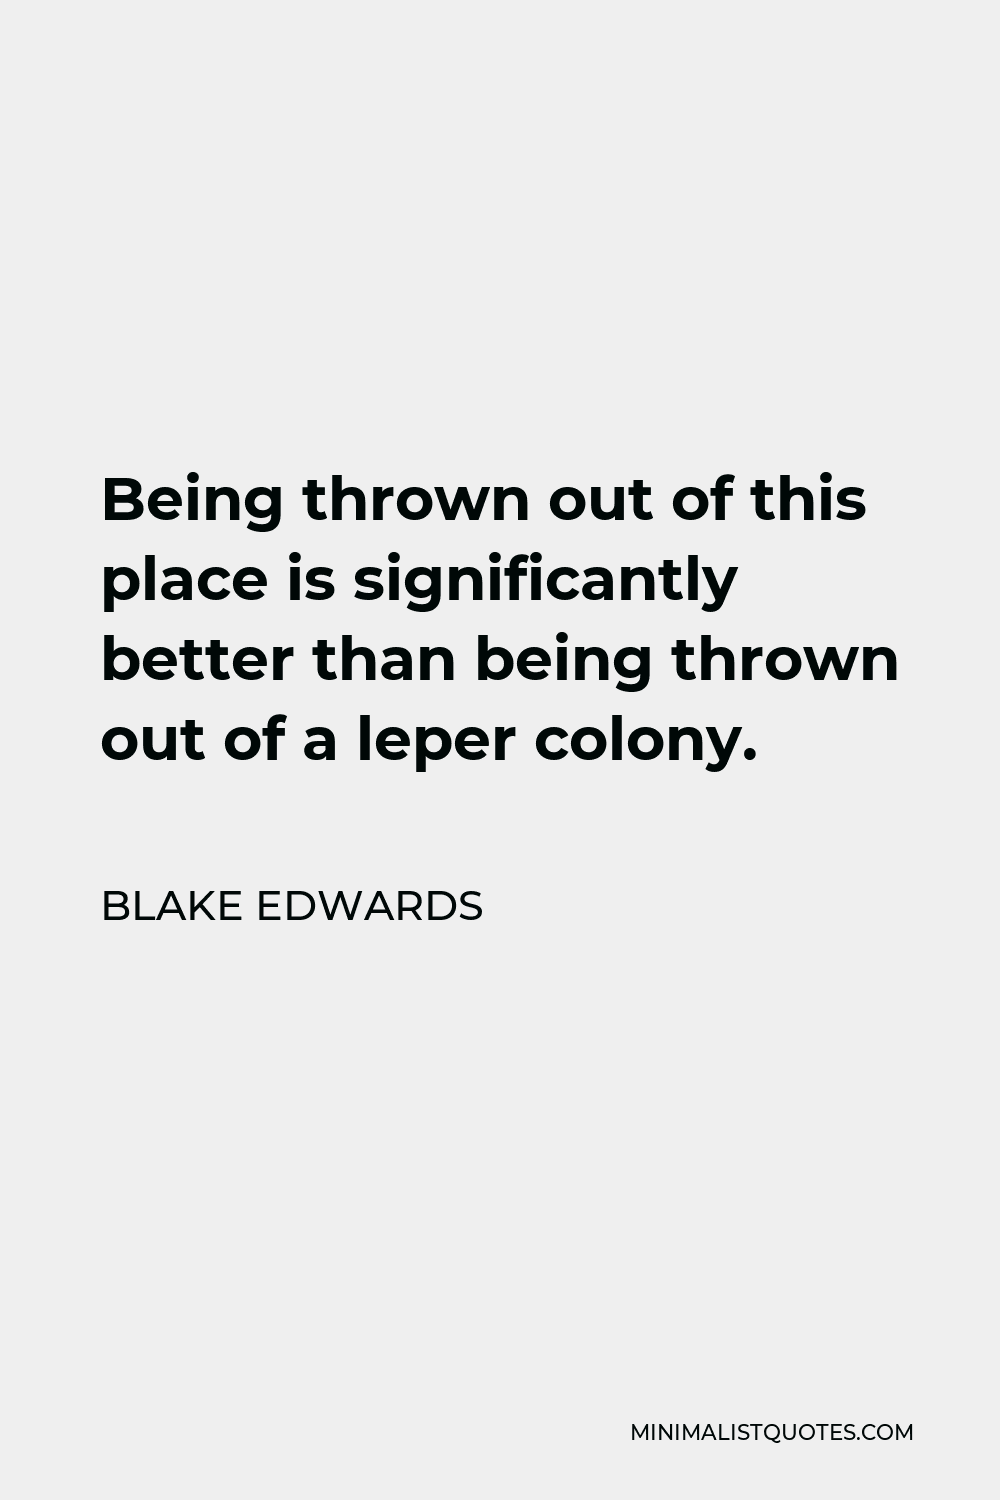 Blake Edwards Quote - Being thrown out of this place is significantly better than being thrown out of a leper colony.